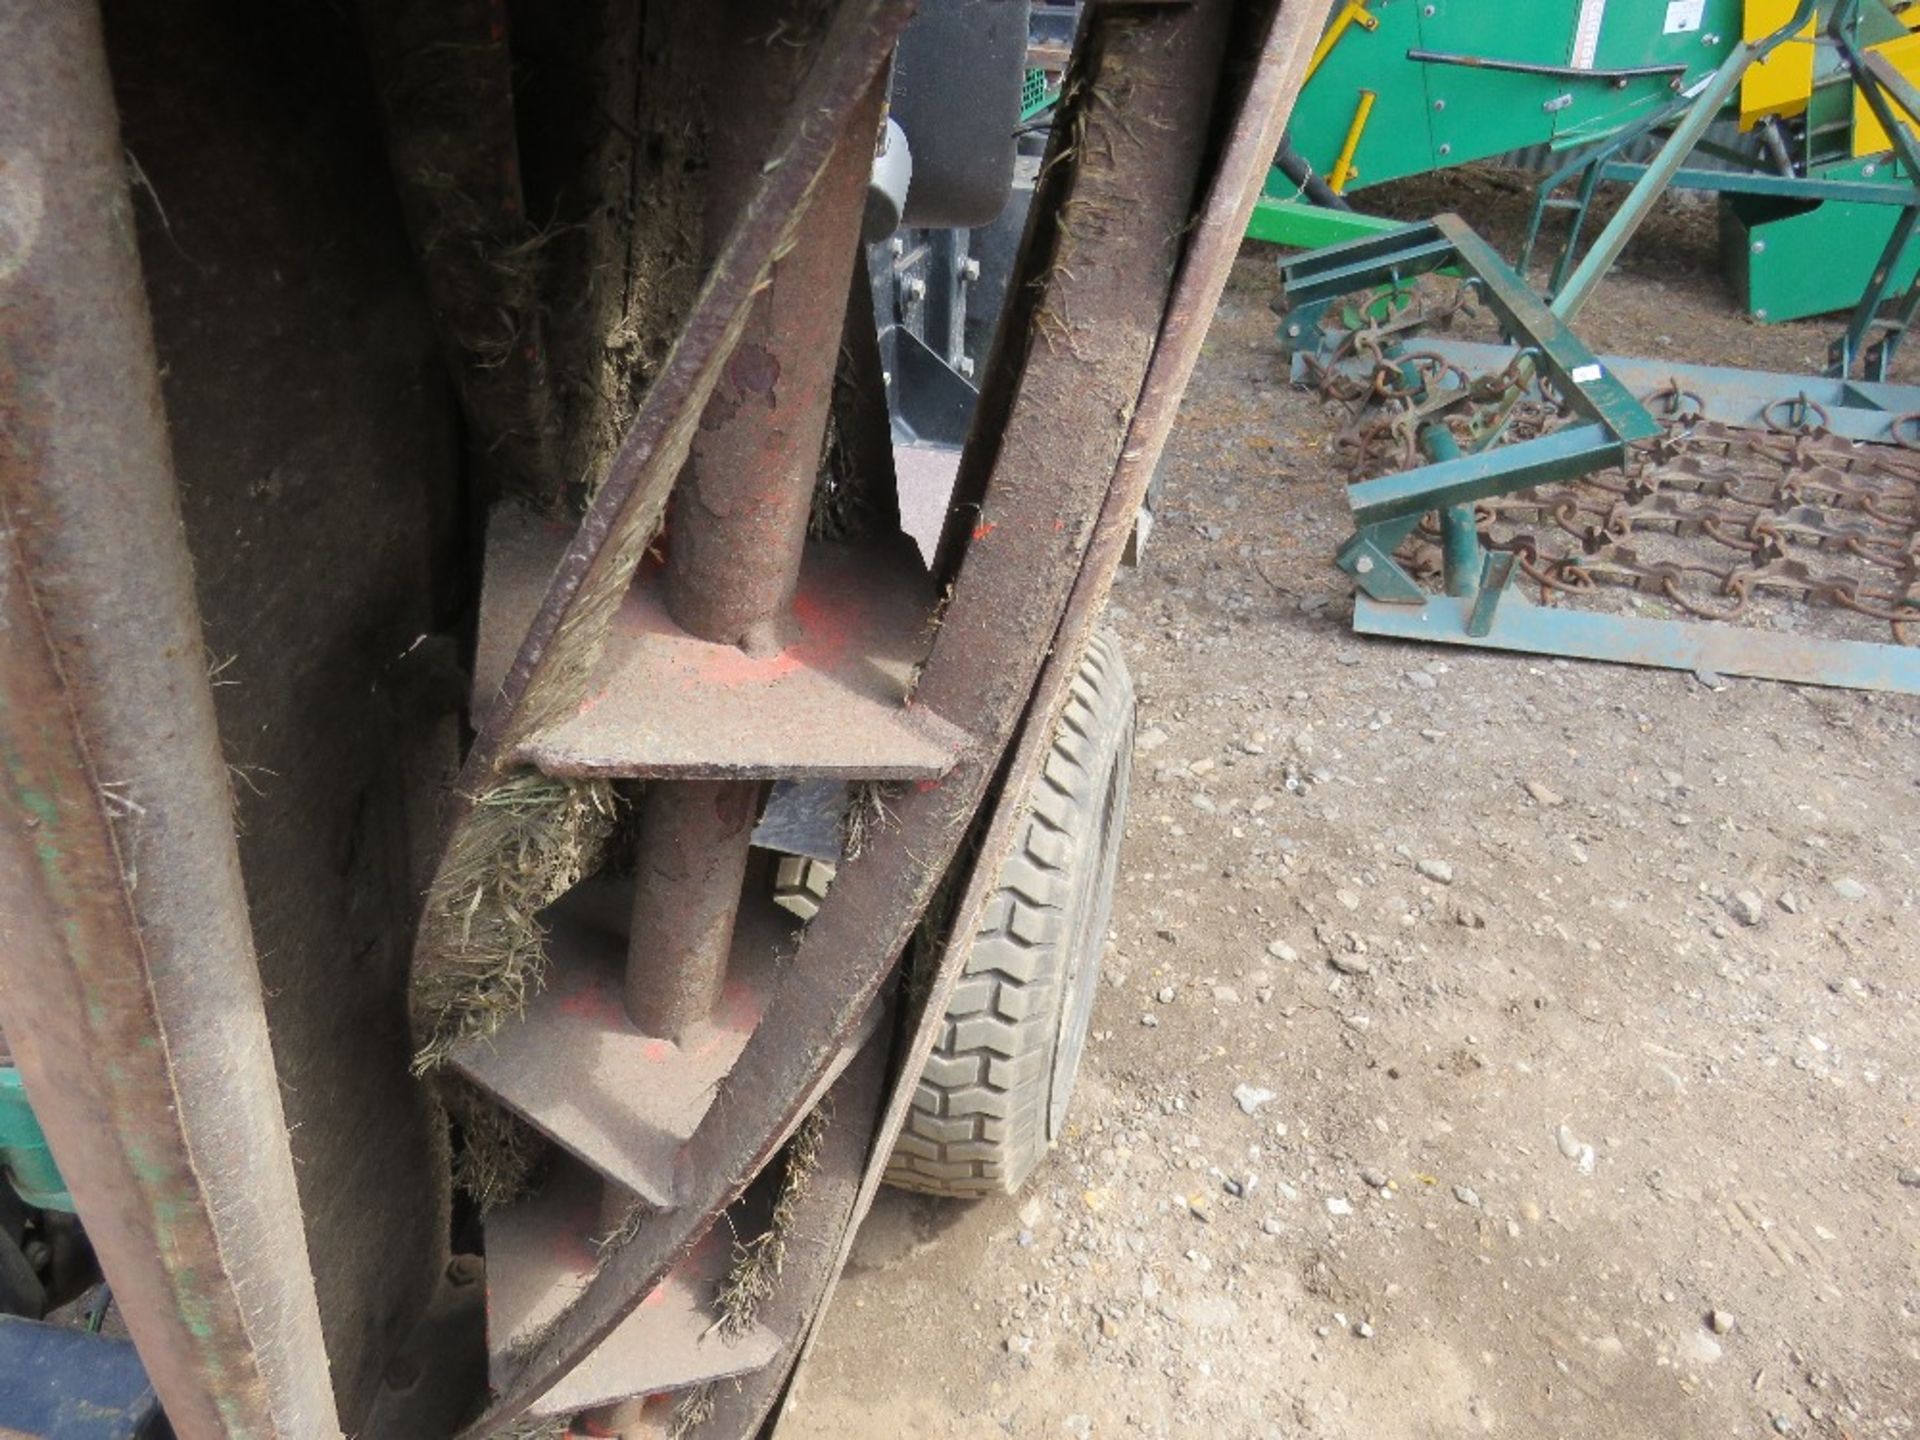 RANSOMES HIGHWAY 2130 4WD TRIPLE MOWER REG:SF08 PVU LOG BOOK TO APPLY FOR WHEN TESTED WAS SEEN TO - Image 6 of 7